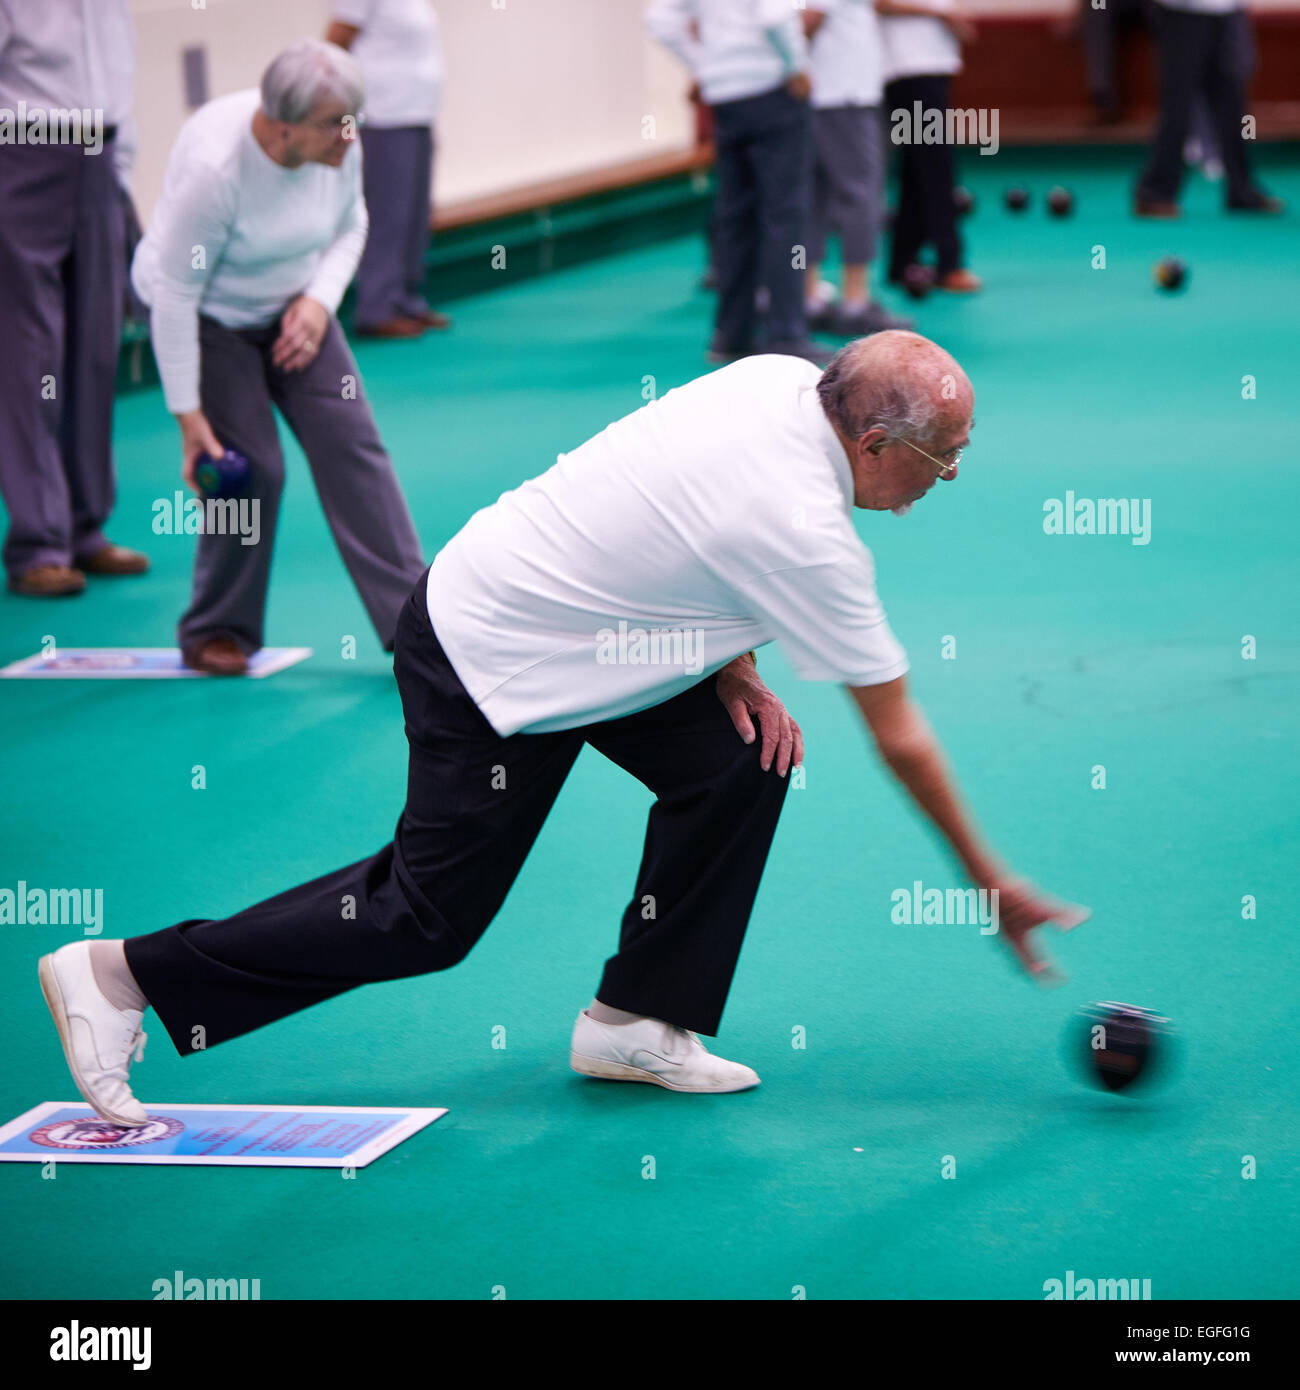 Members of the Oxford & District Indoor Bowls Club playing. Contains motion blur. Stock Photo